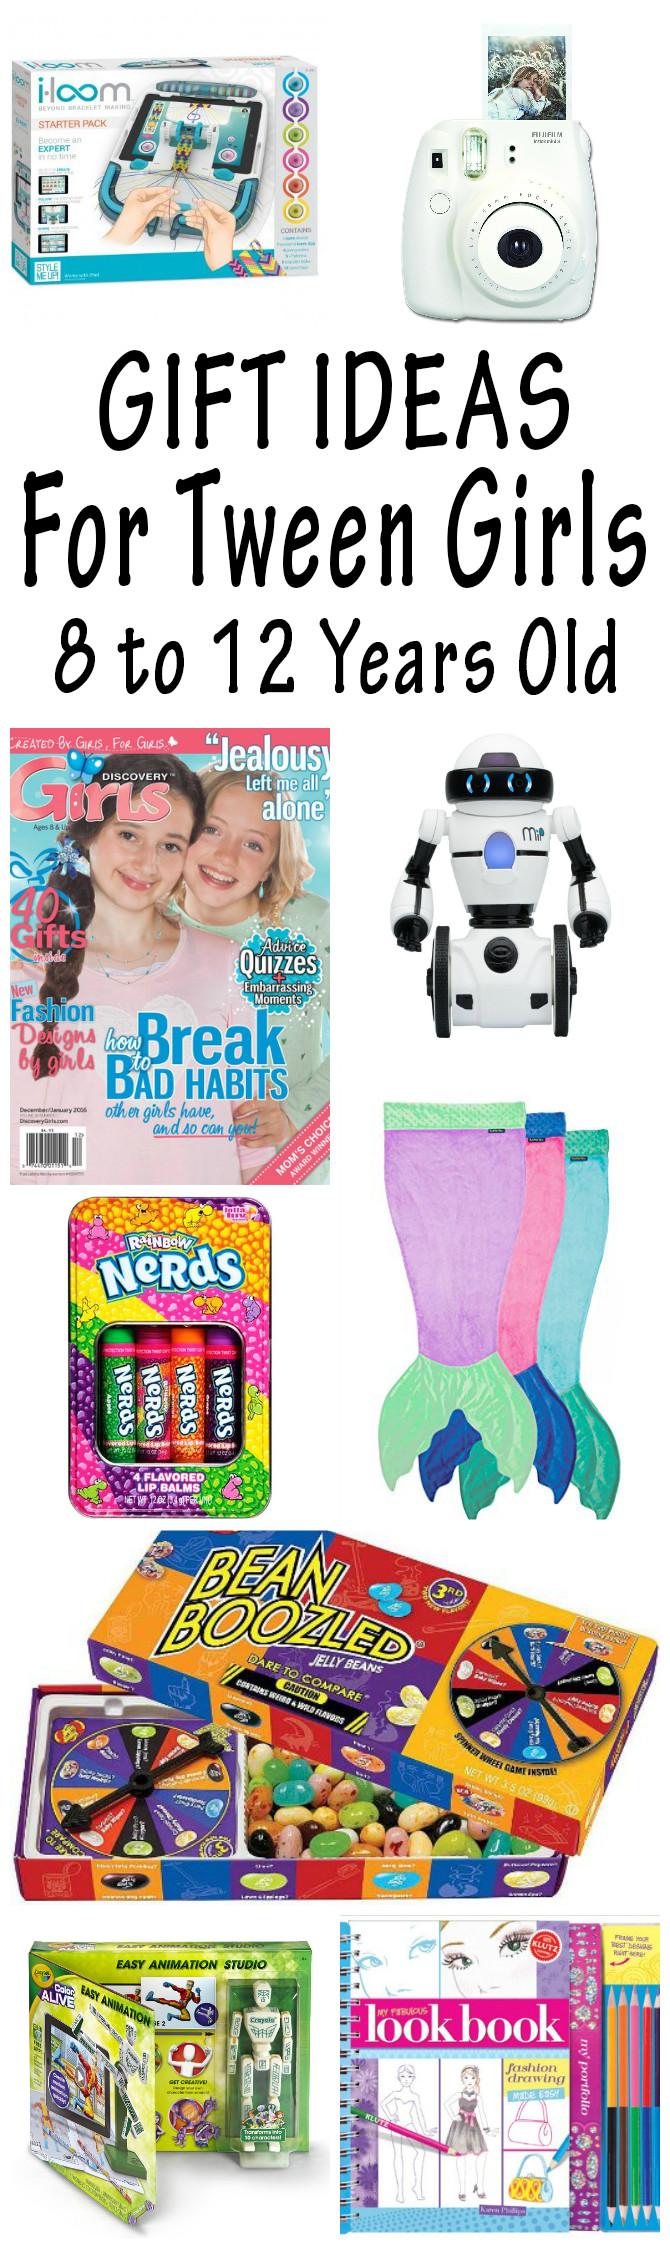 Gift Ideas For Girls Age 12
 Gift Ideas For Tween Girls They Will Love 2017 Christmas